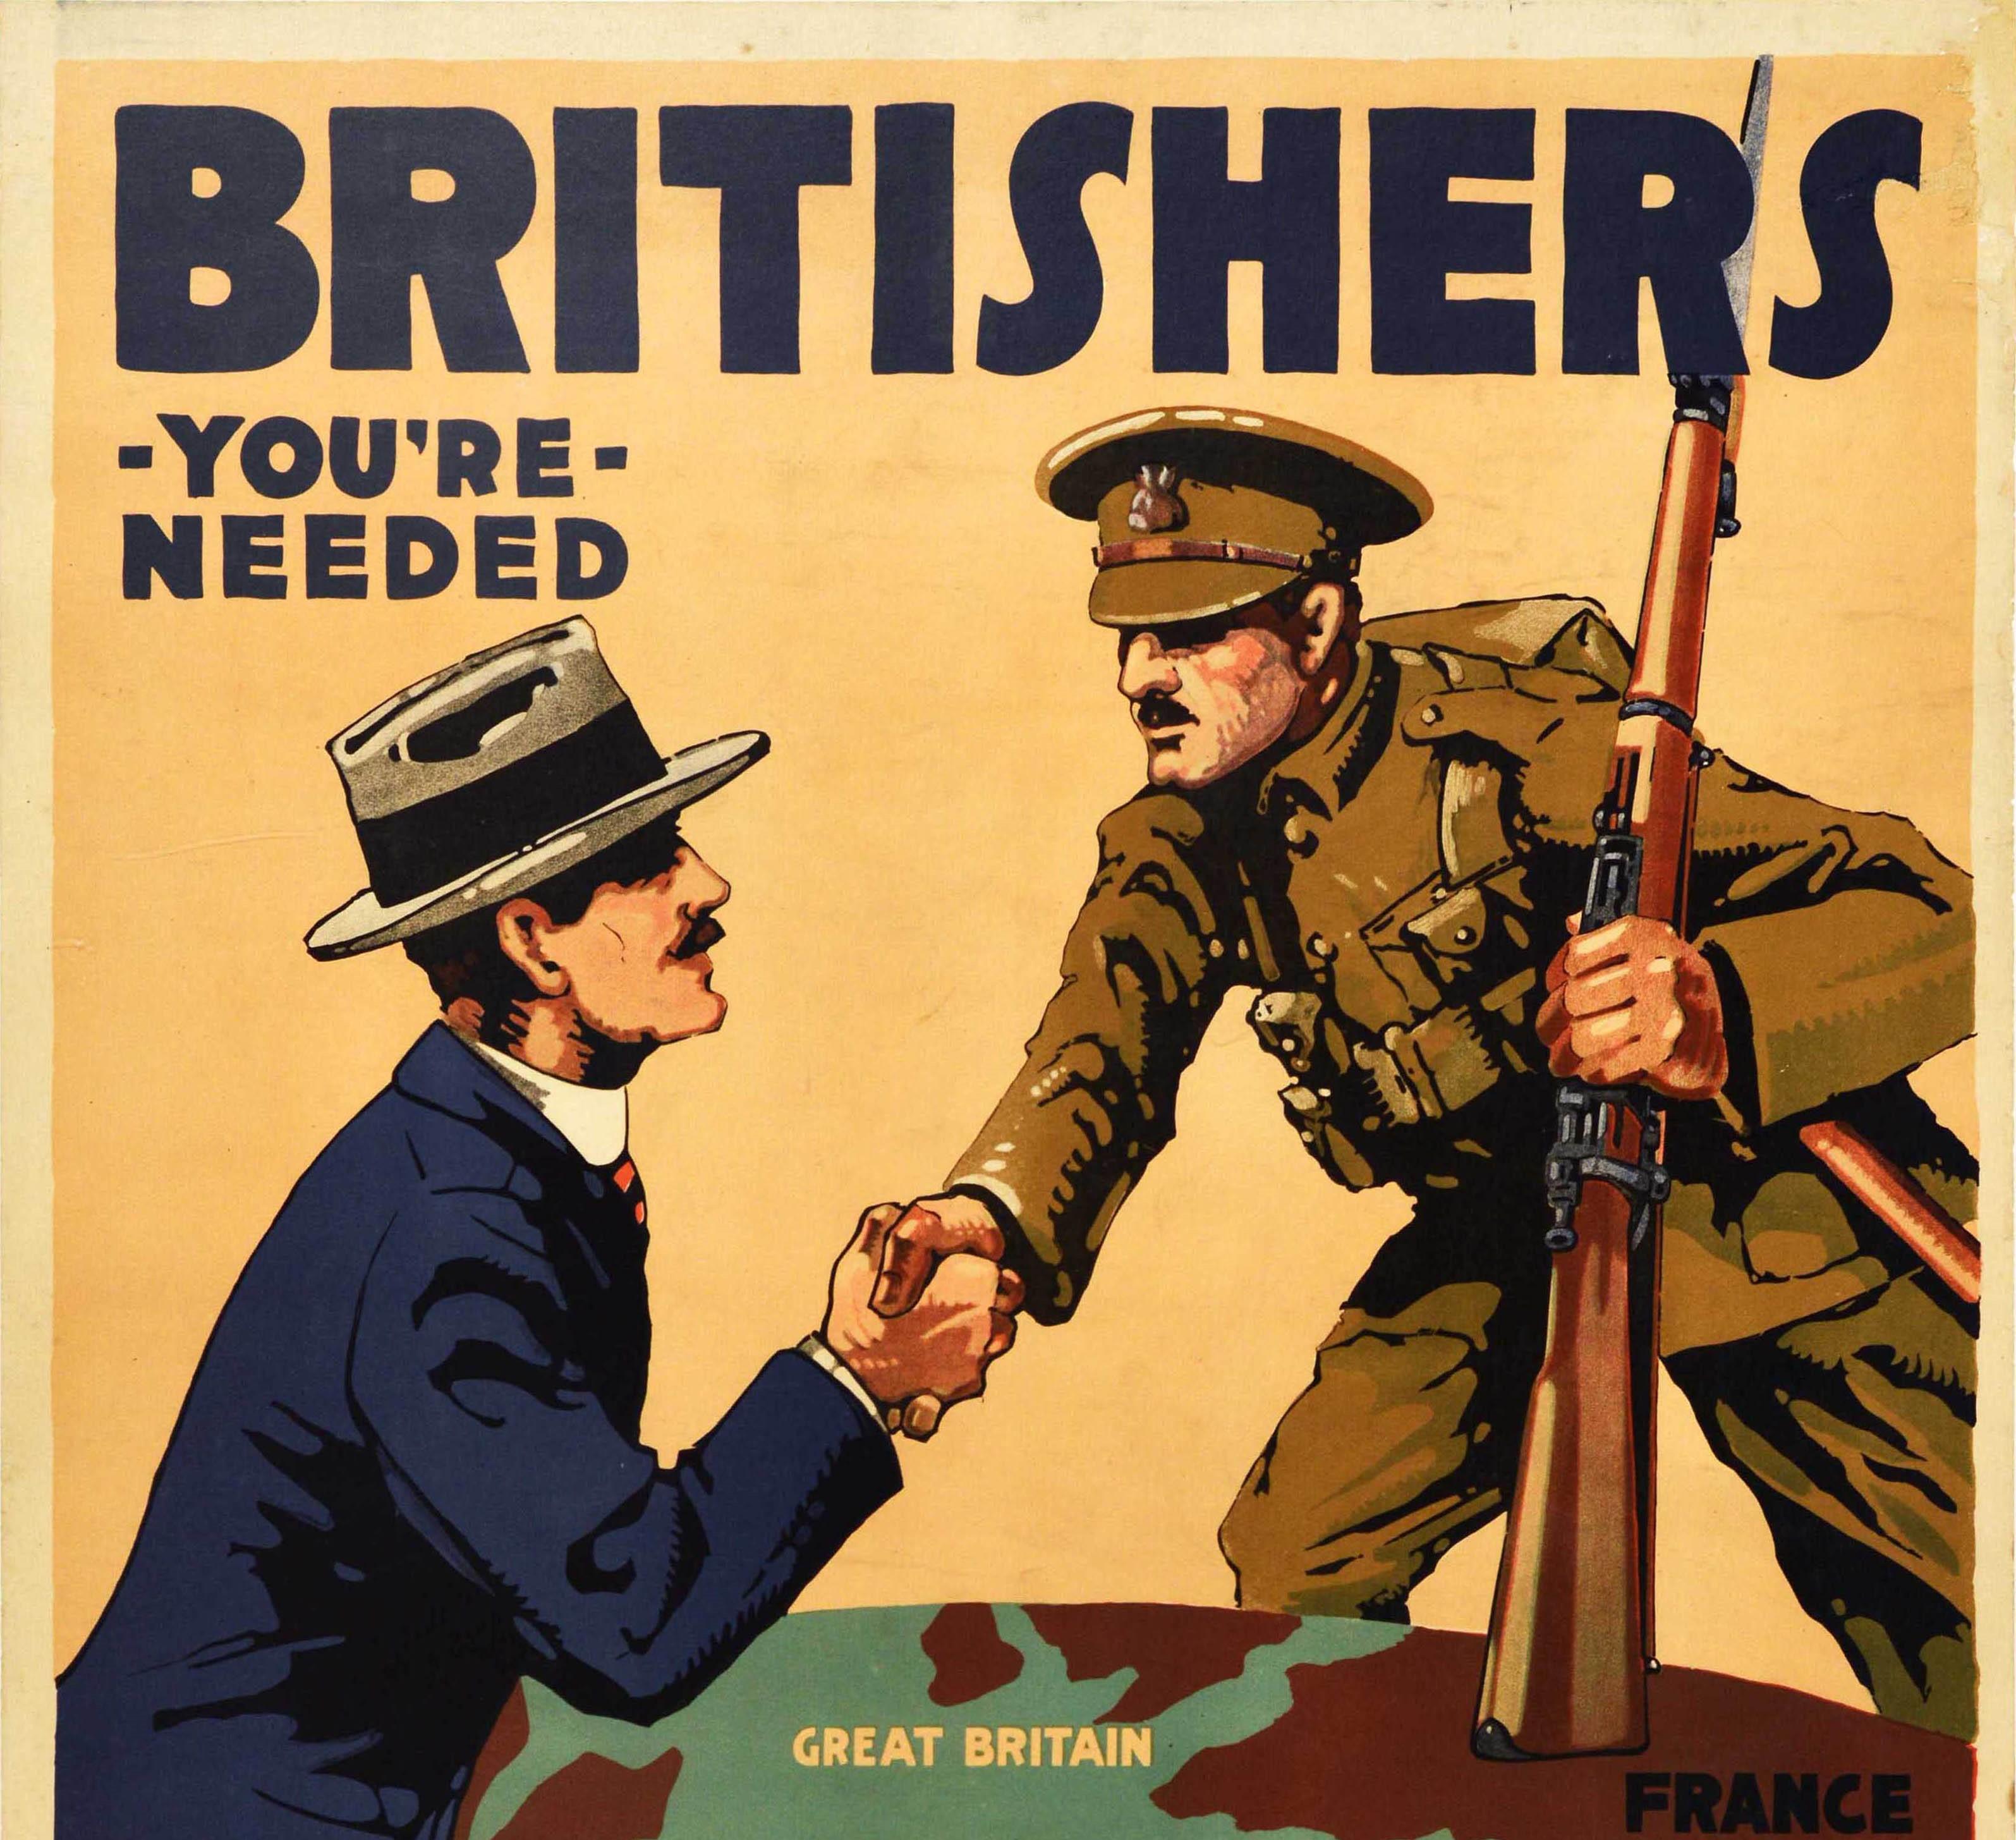 Original antique World War One recruitment poster - Britishers You're Needed Come Across Now - featuring an image on a globe map depicting a soldier holding a rifle in Europe (Great Britain / France) stretching a hand across the Atlantic Ocean to